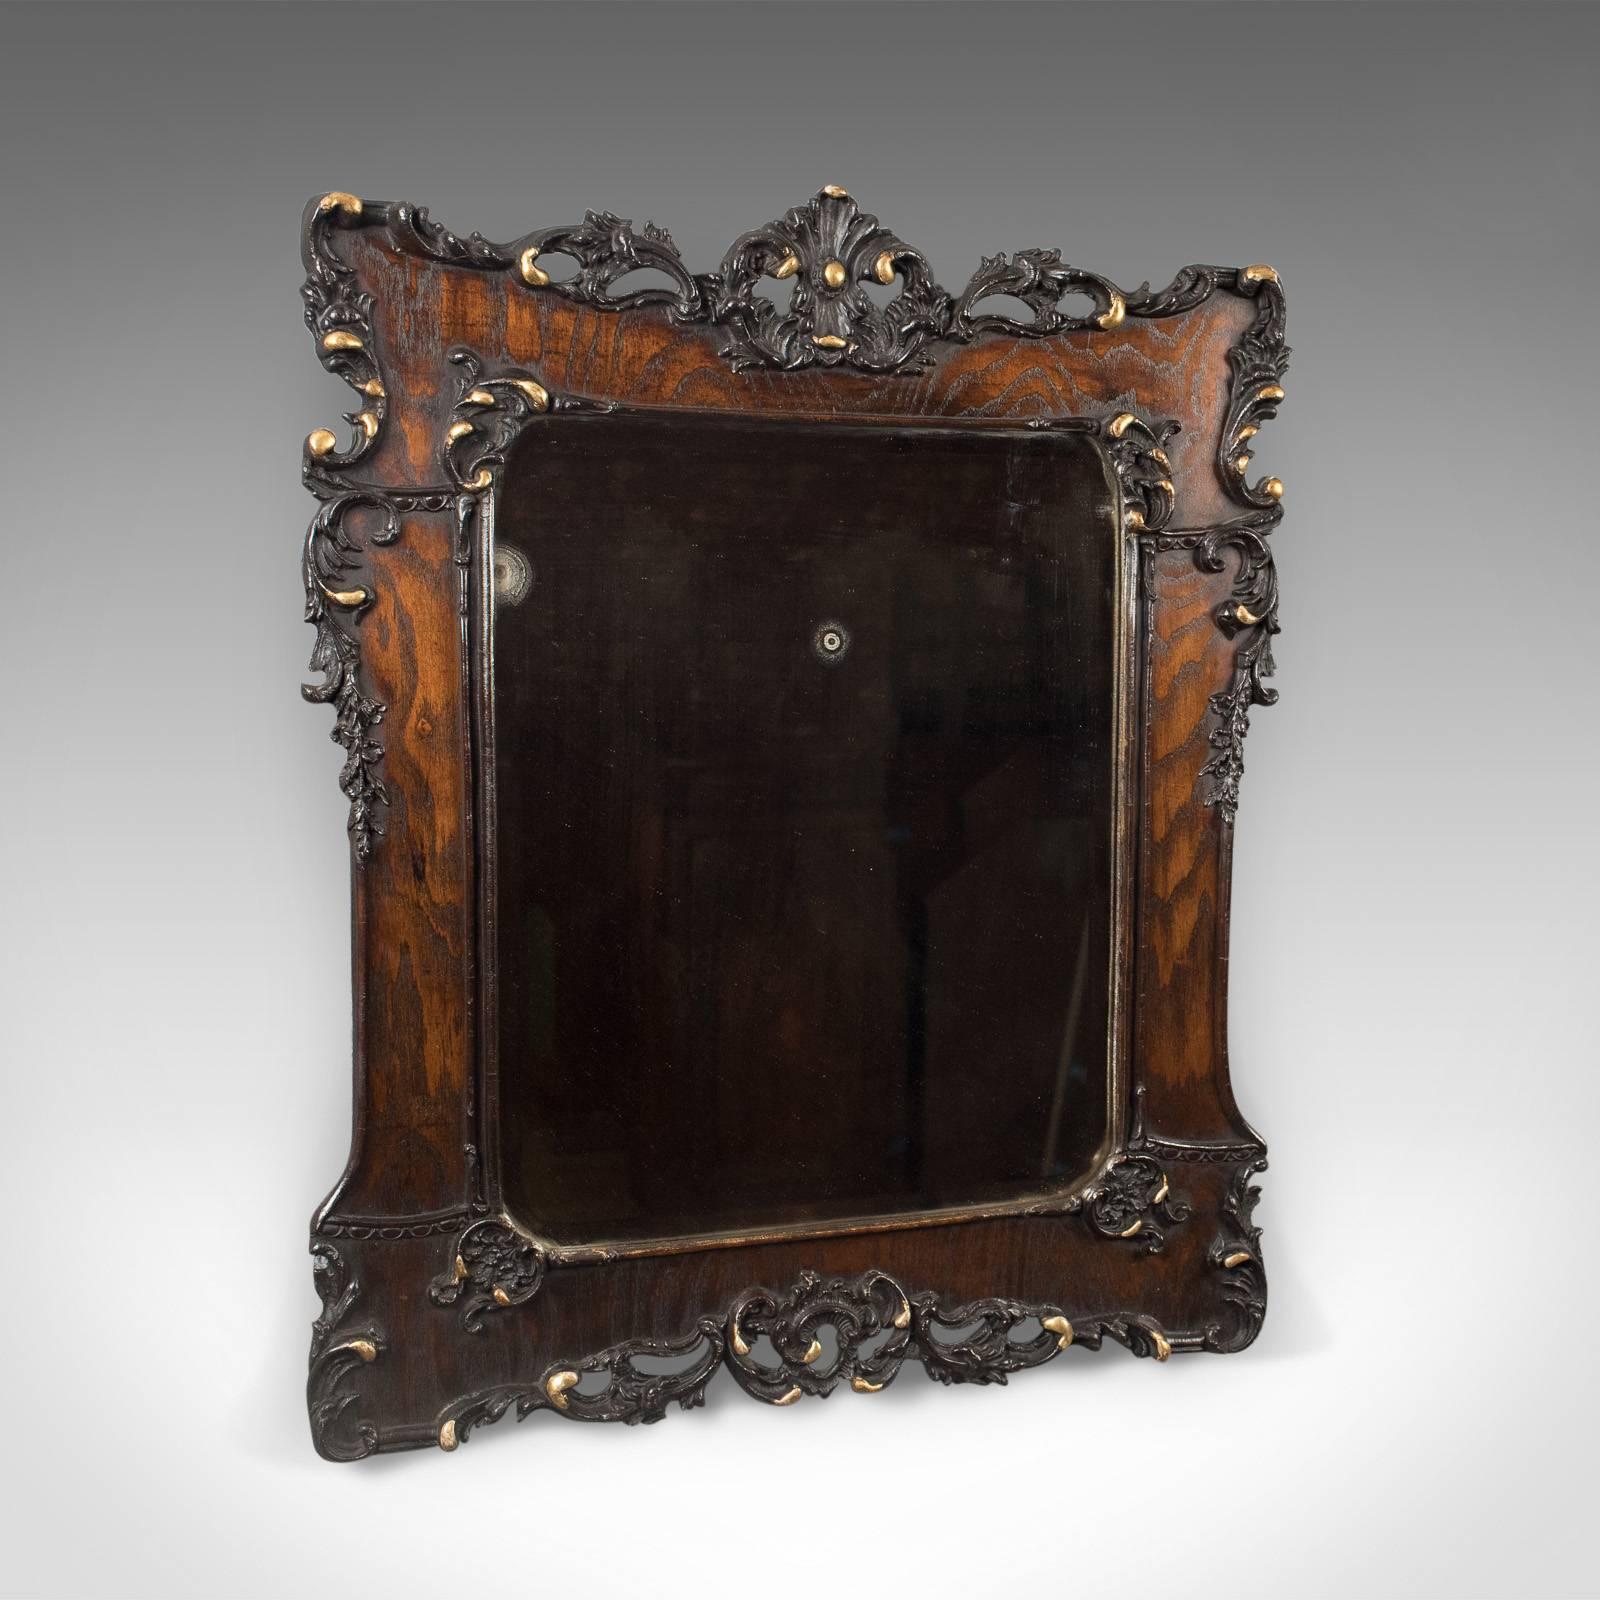 This is an antique wall mirror in an oak frame from the late Victorian period, English, circa 1890.

Attractive grain interest highlighted with the dark stained finish
Pierced mounts of carved 'C' scrolls, shells and foliate swags
Ebonized and